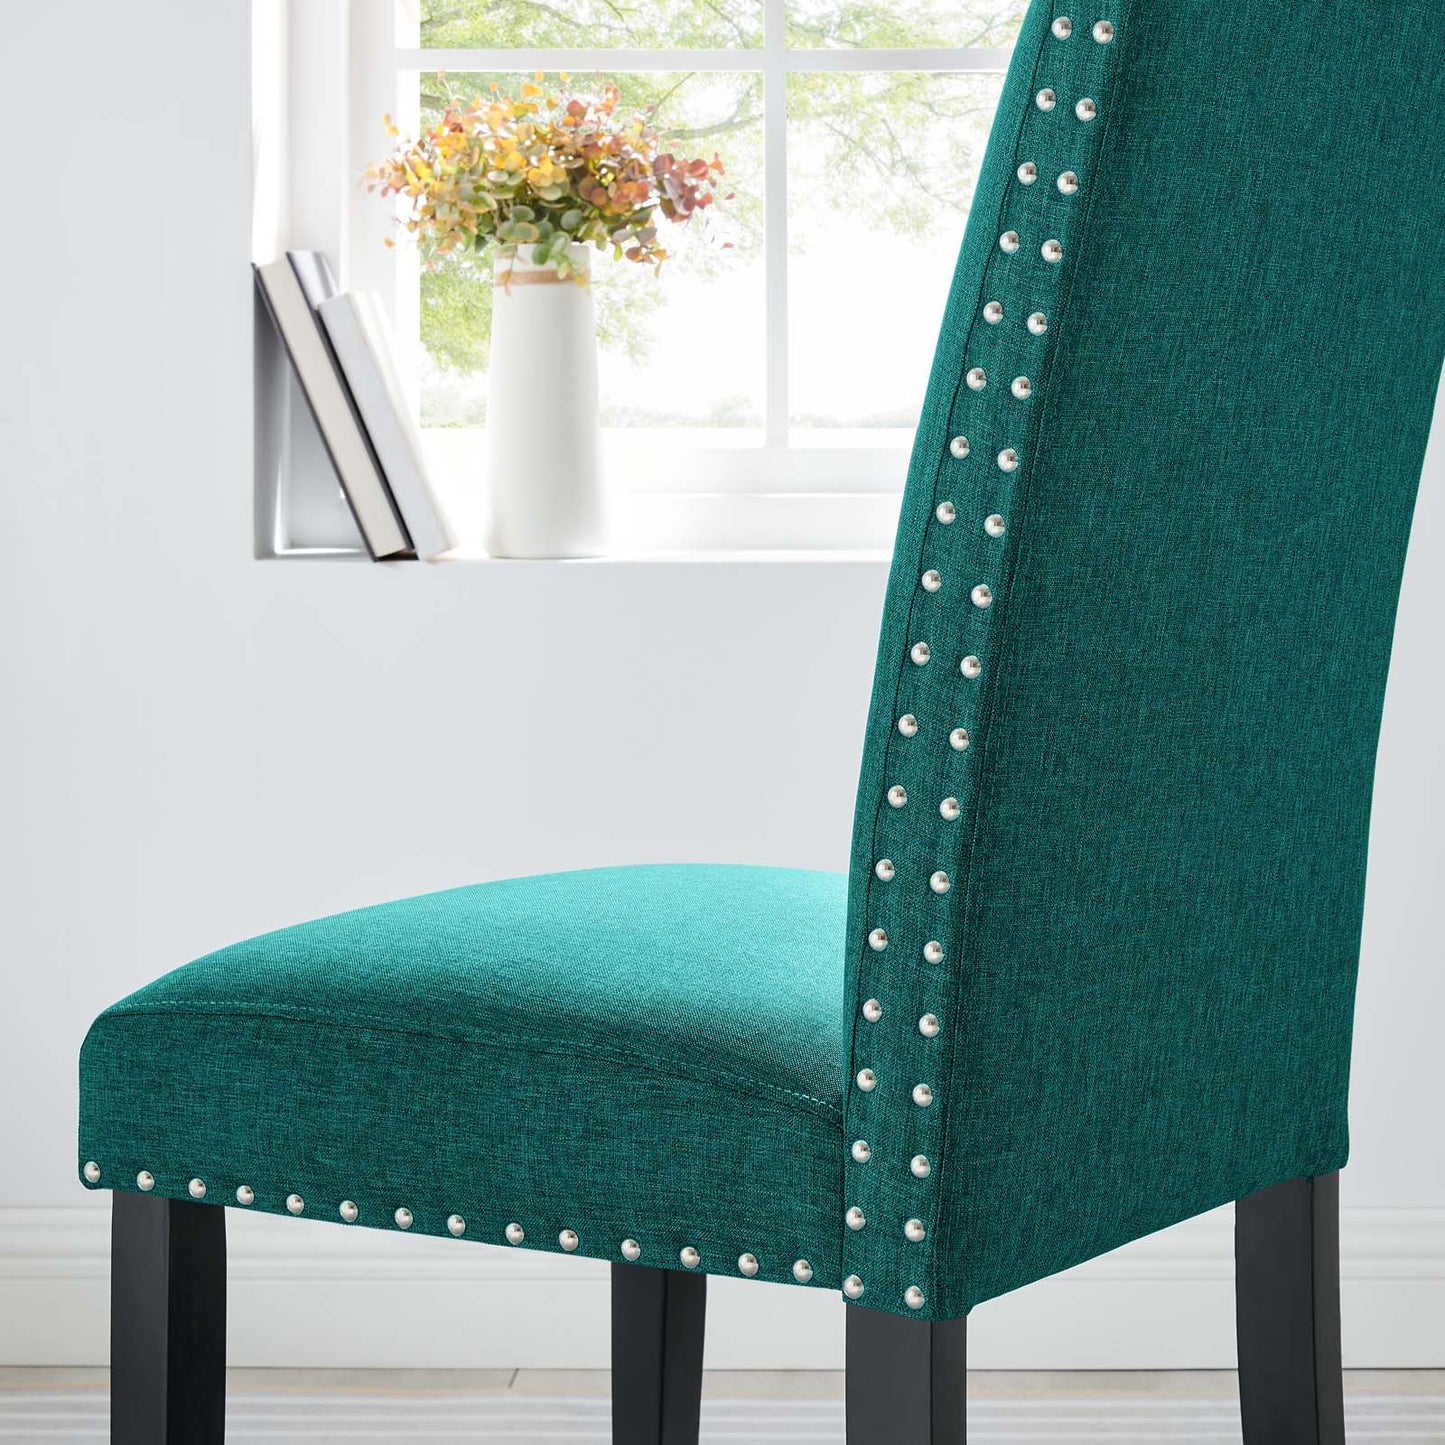 Parcel Dining Upholstered Fabric Side Chair Teal EEI-1384-TEA